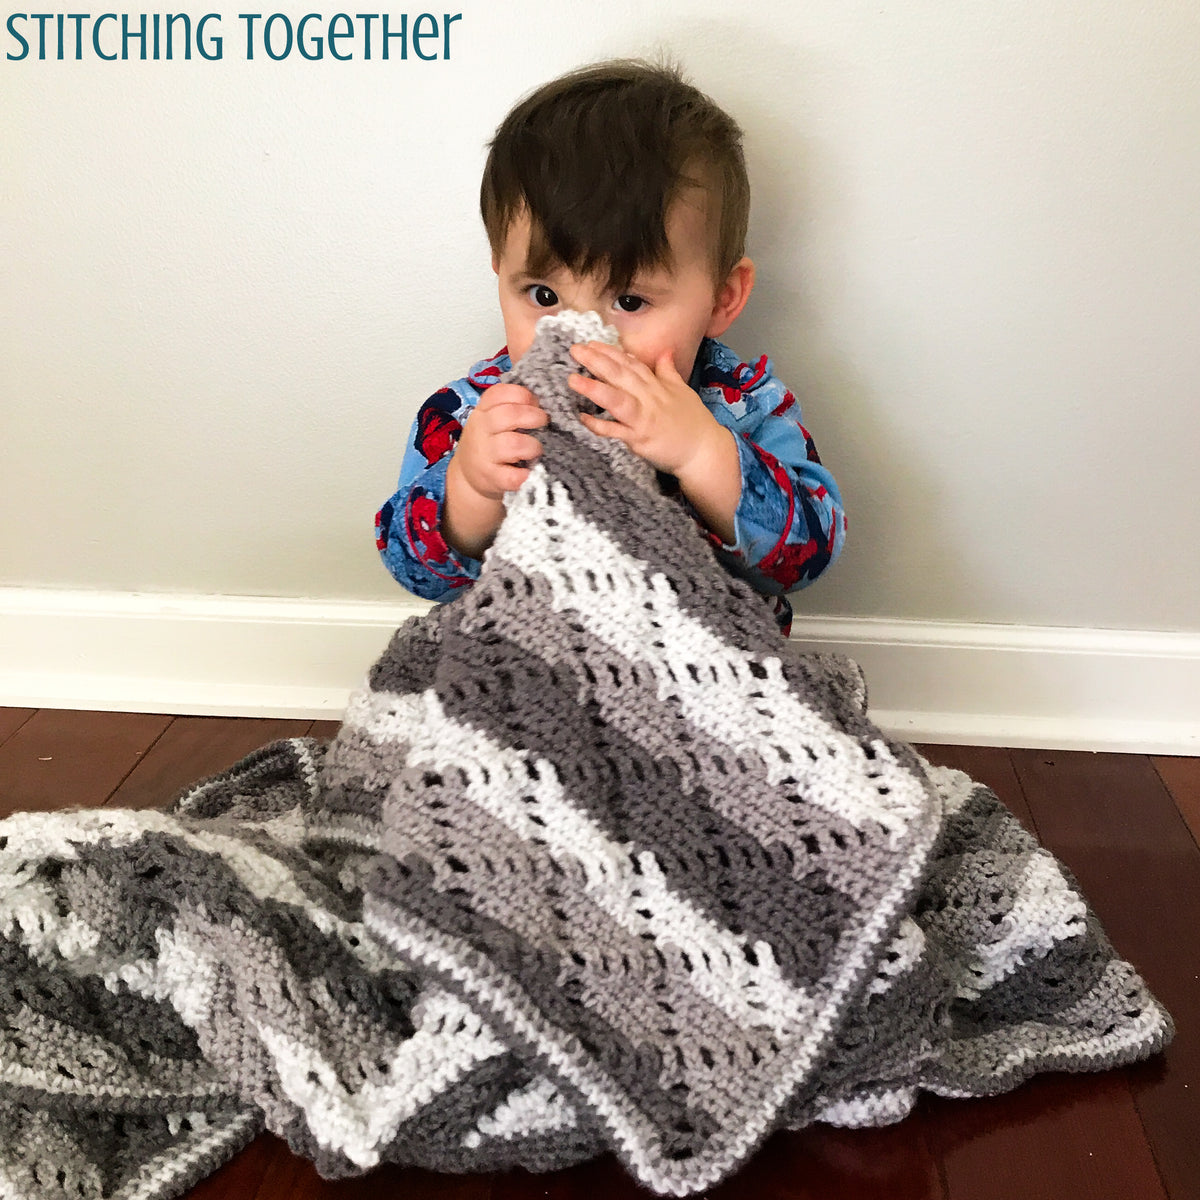 Diamond Lace Baby Blanket Crochet Pattern Download – Stitching Together